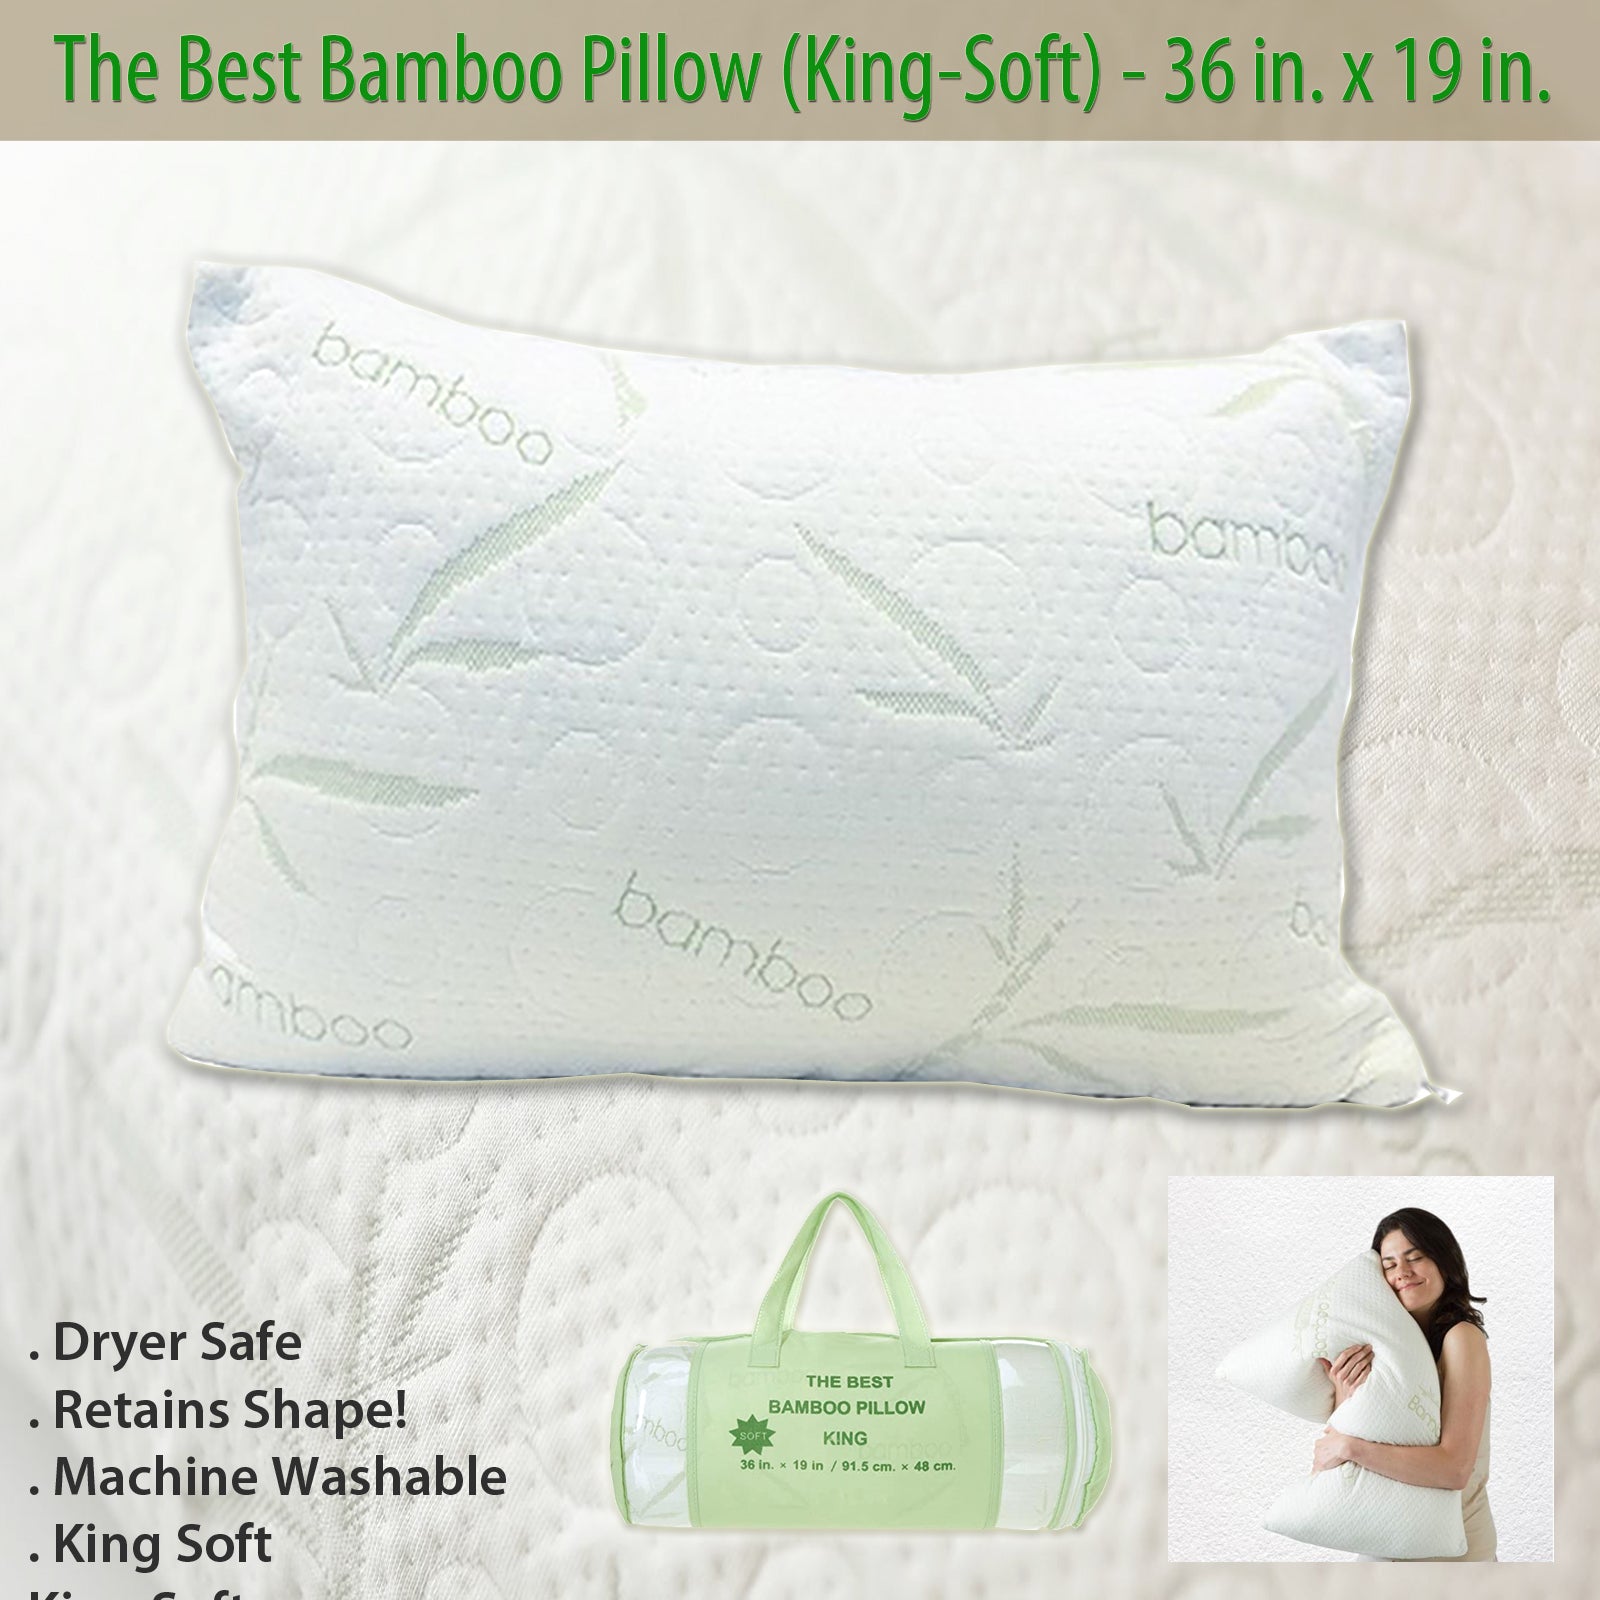 8 Best Bamboo Pillows to Cozy up With